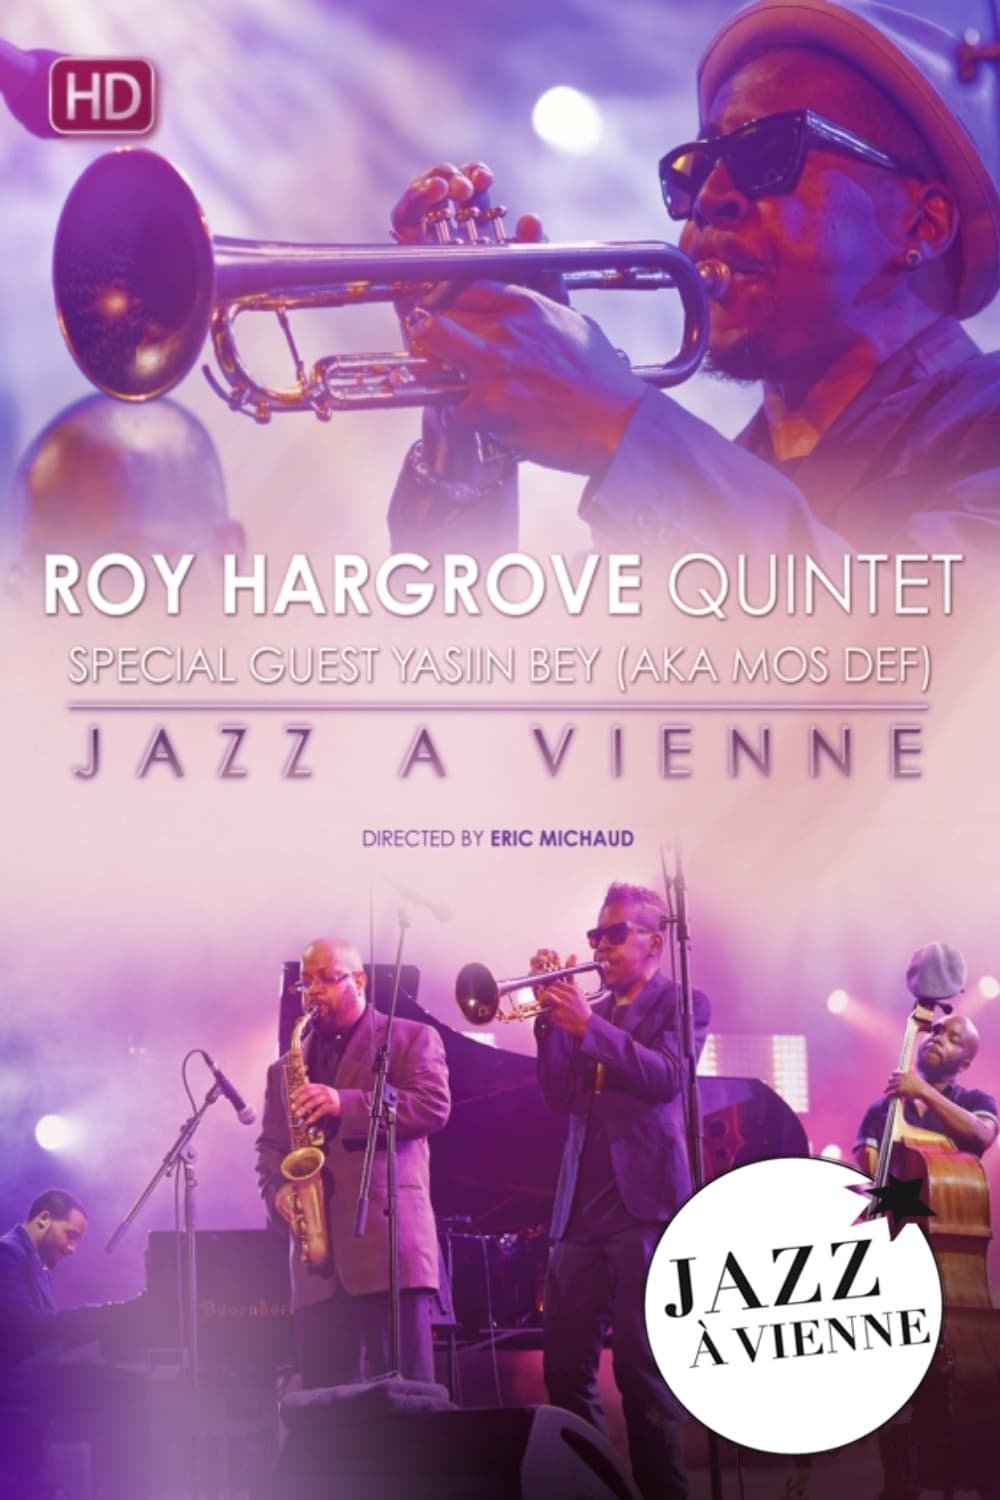 Roy Hargrove Quintet Special guest Yasiin Bey (Aka Mos Def) Live at Jazz A Vienne